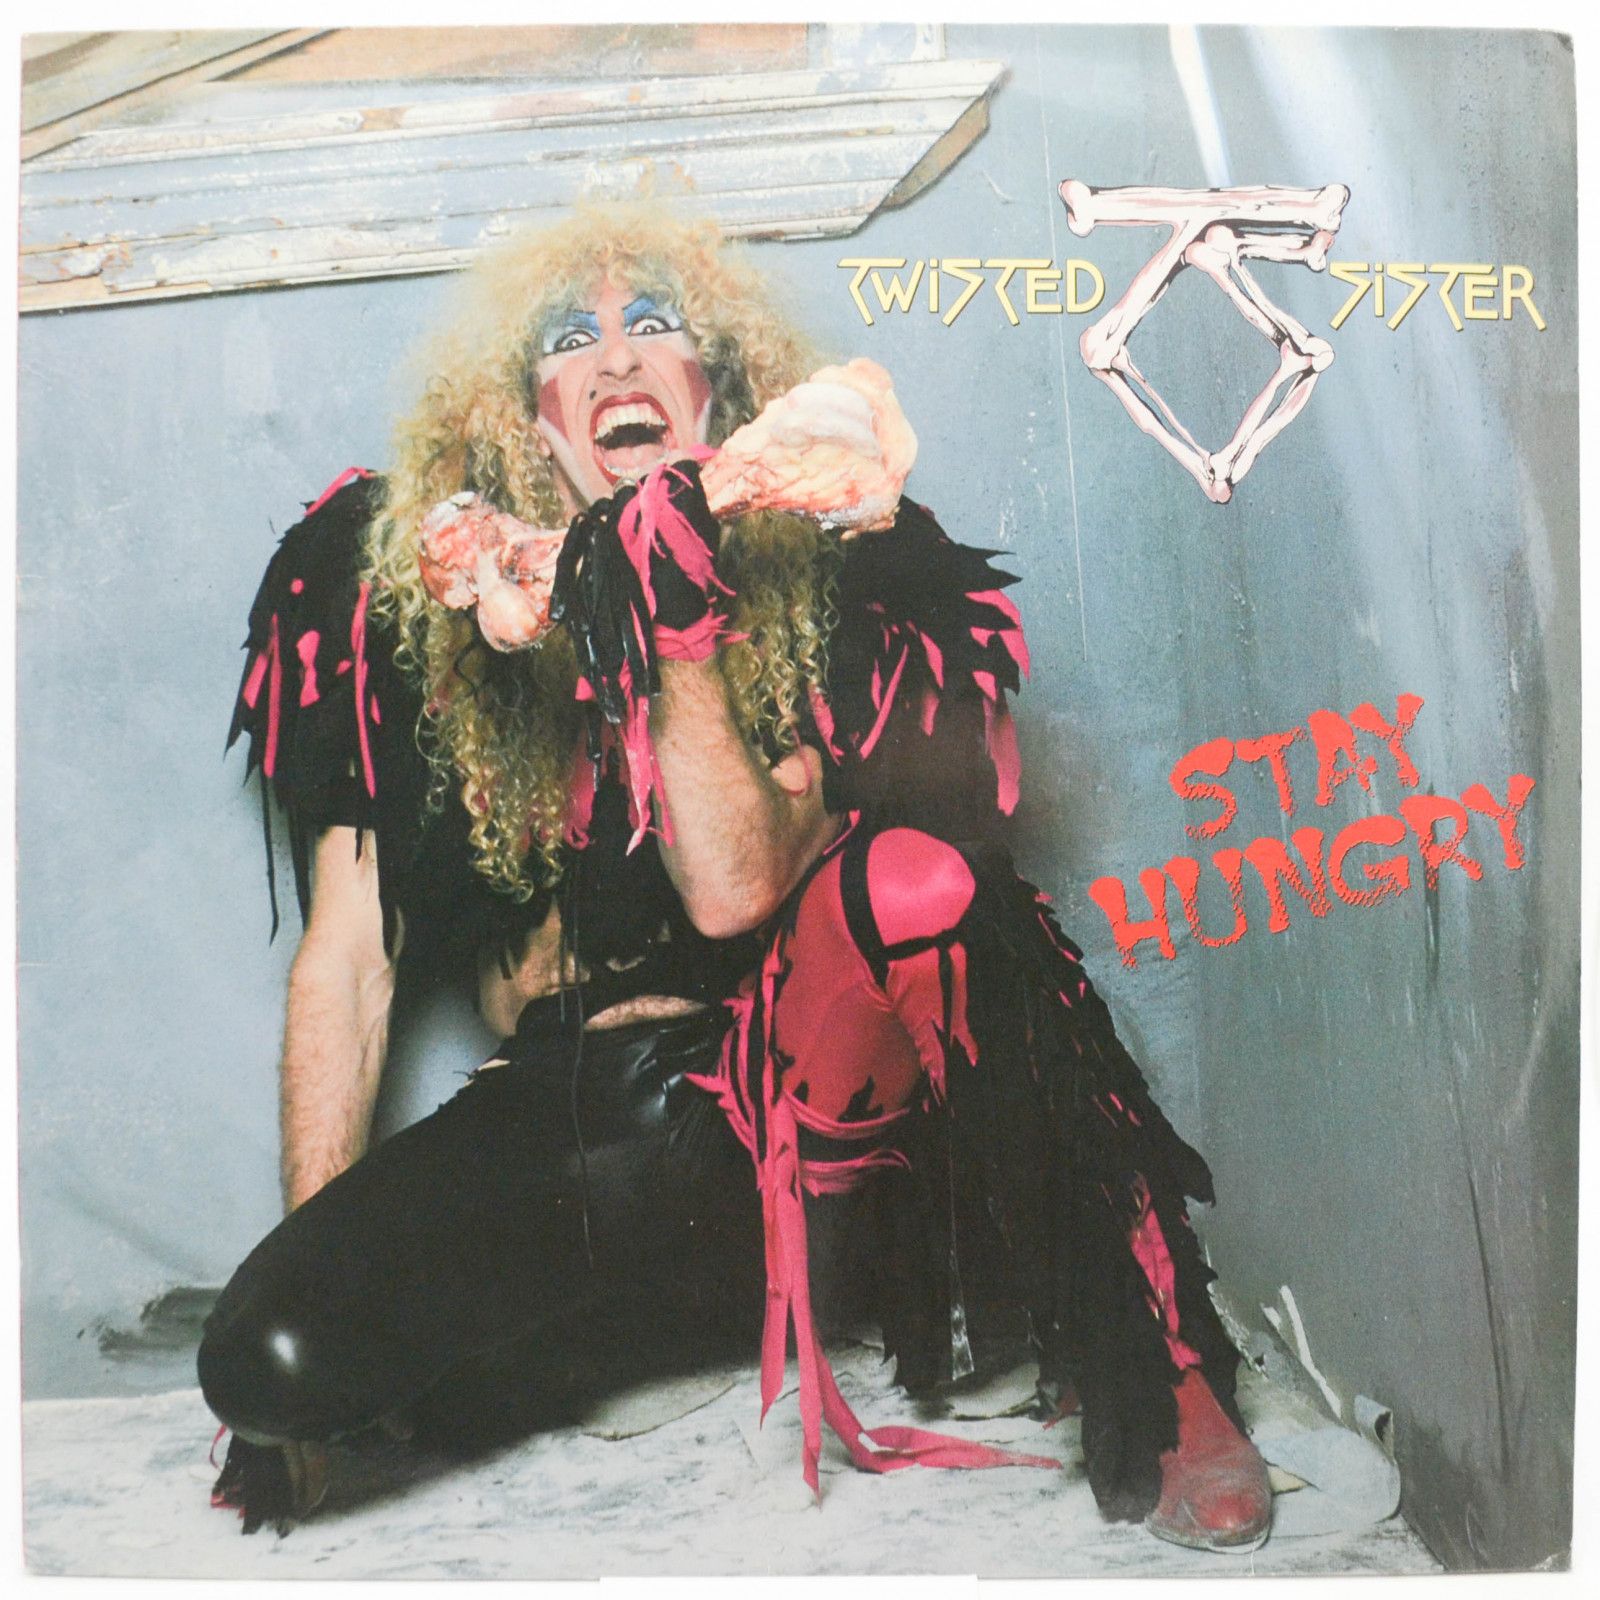 Twisted Sister — Stay Hungry, 1984